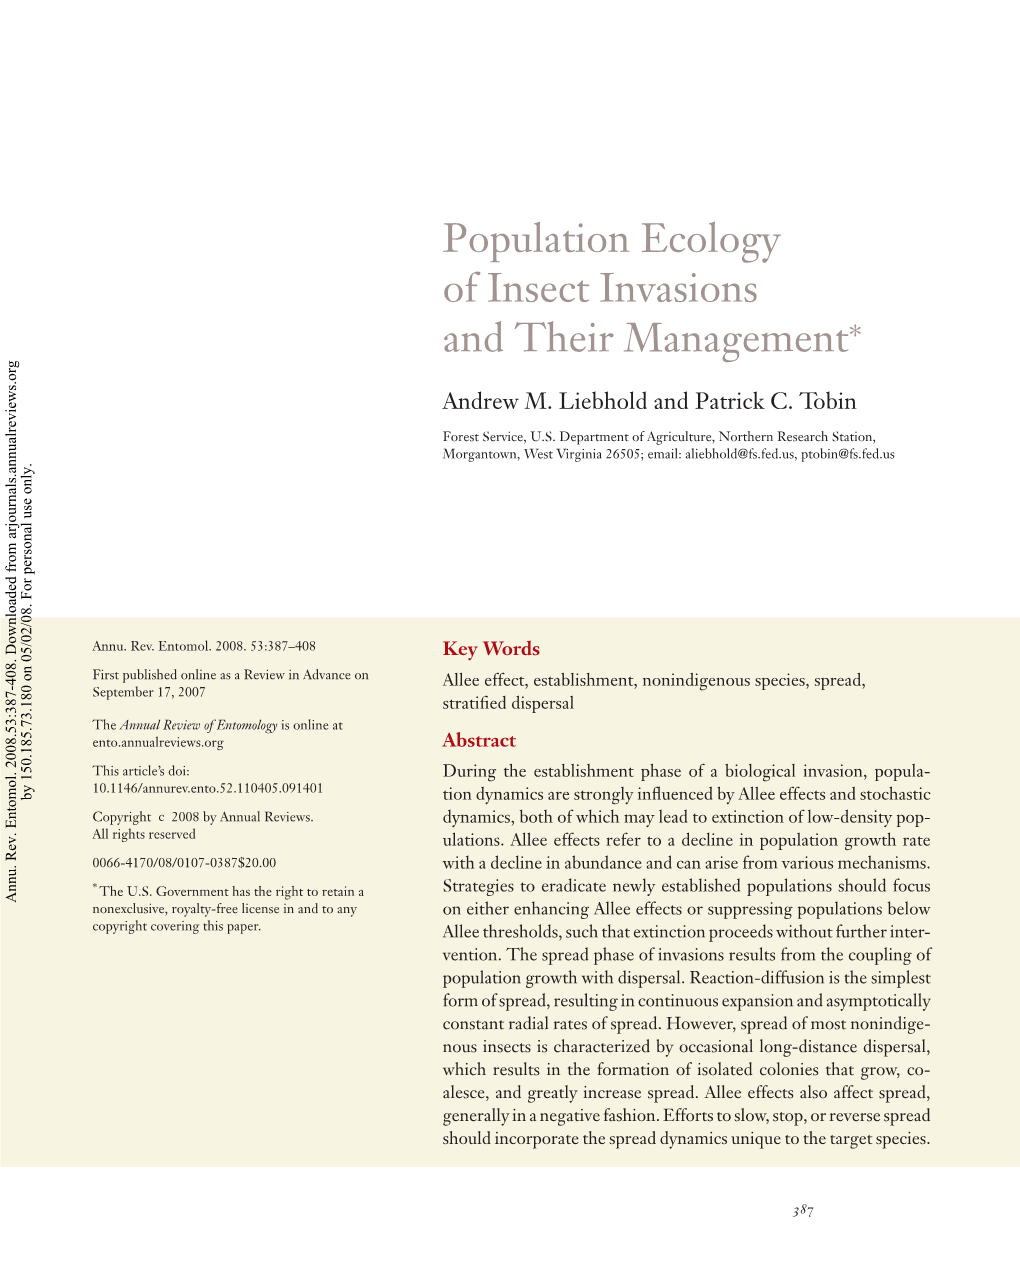 Population Ecology of Insect Invasions and Their Management*